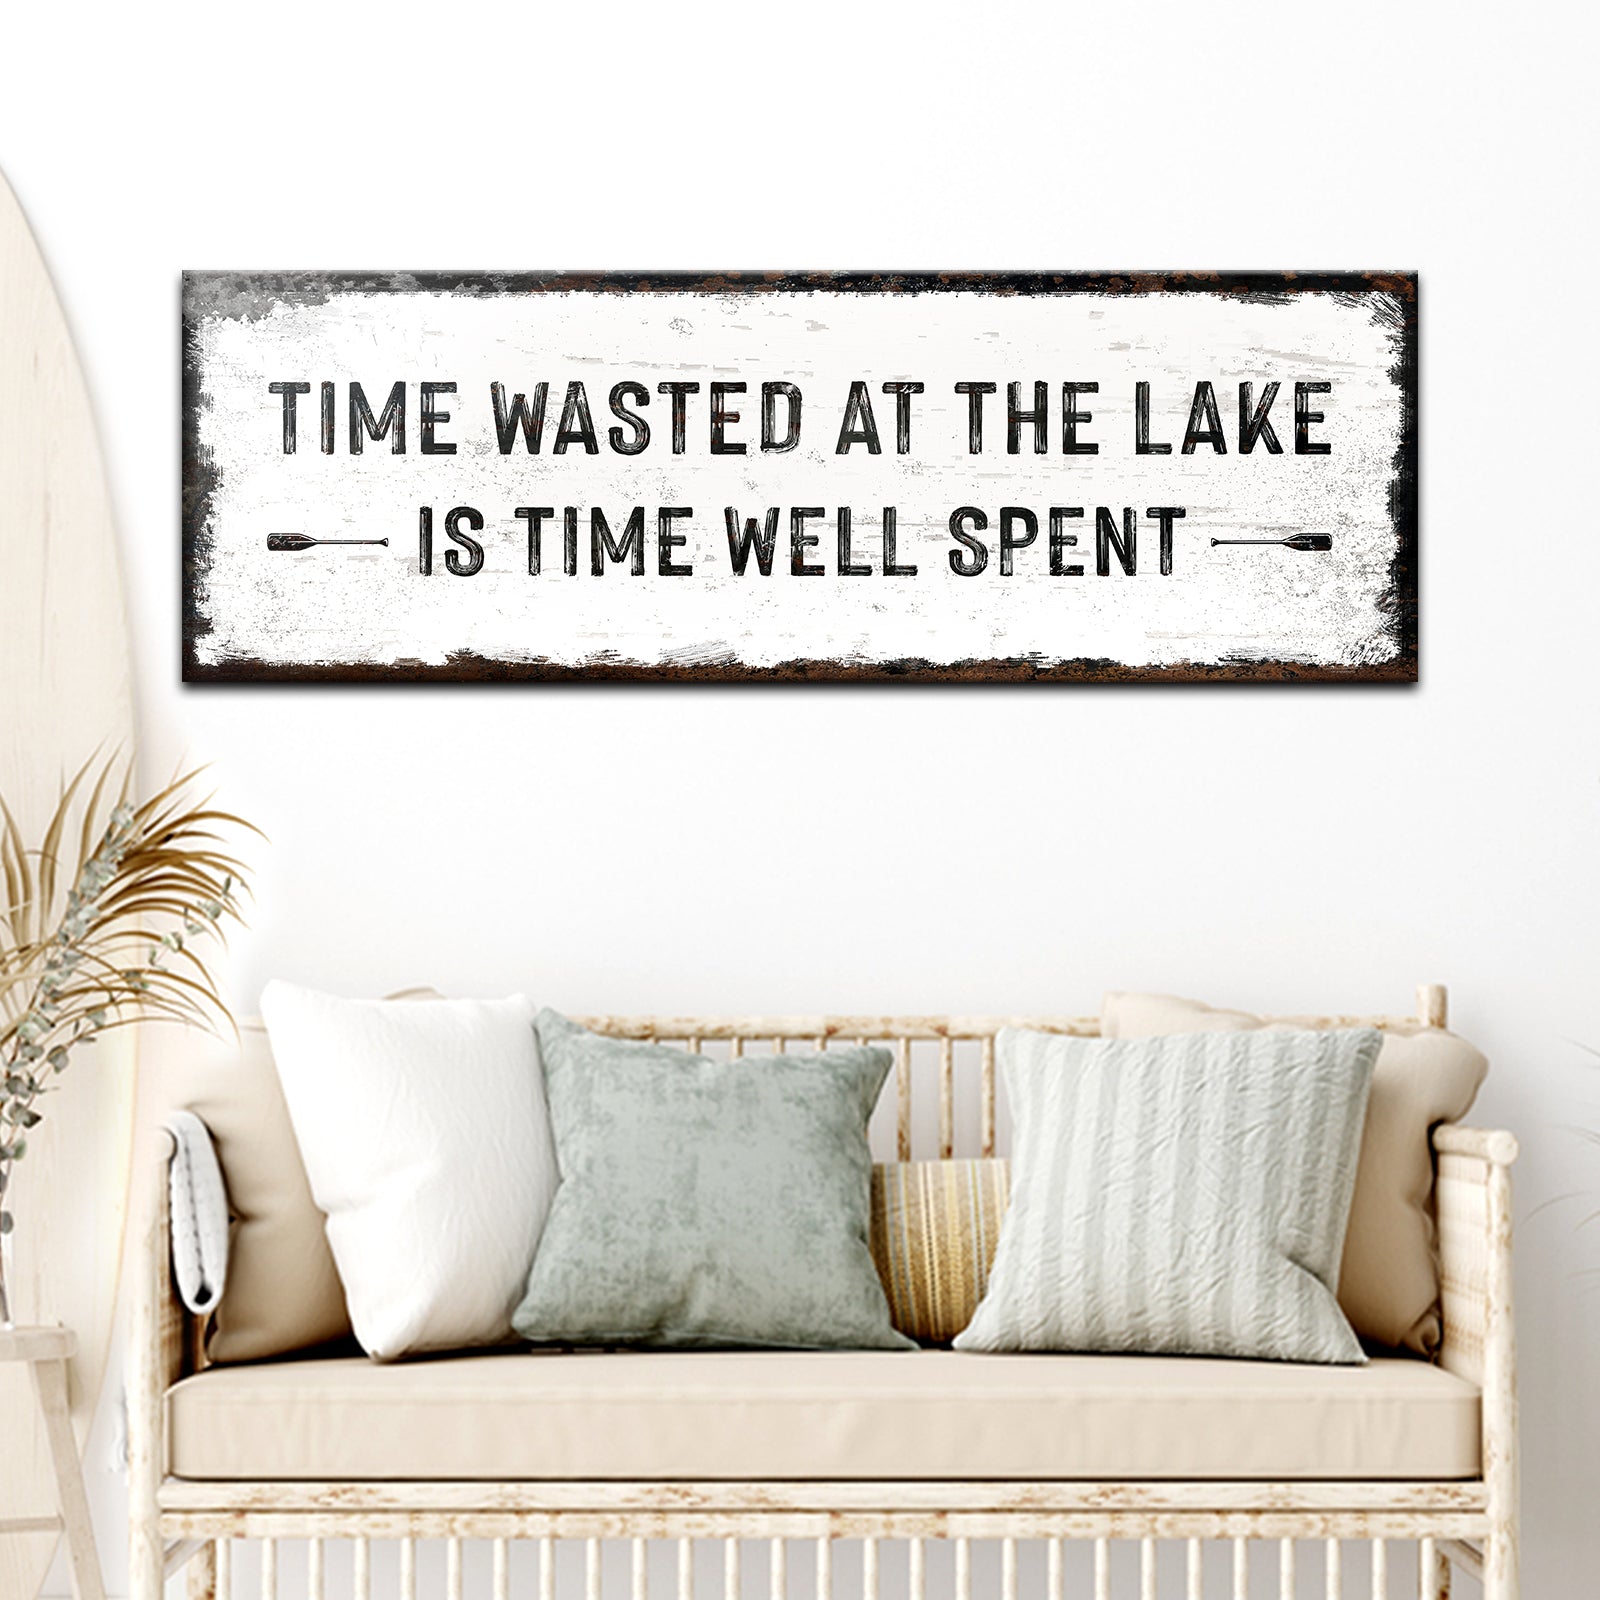 Time At The Lake Sign - Image by Tailored Canvases